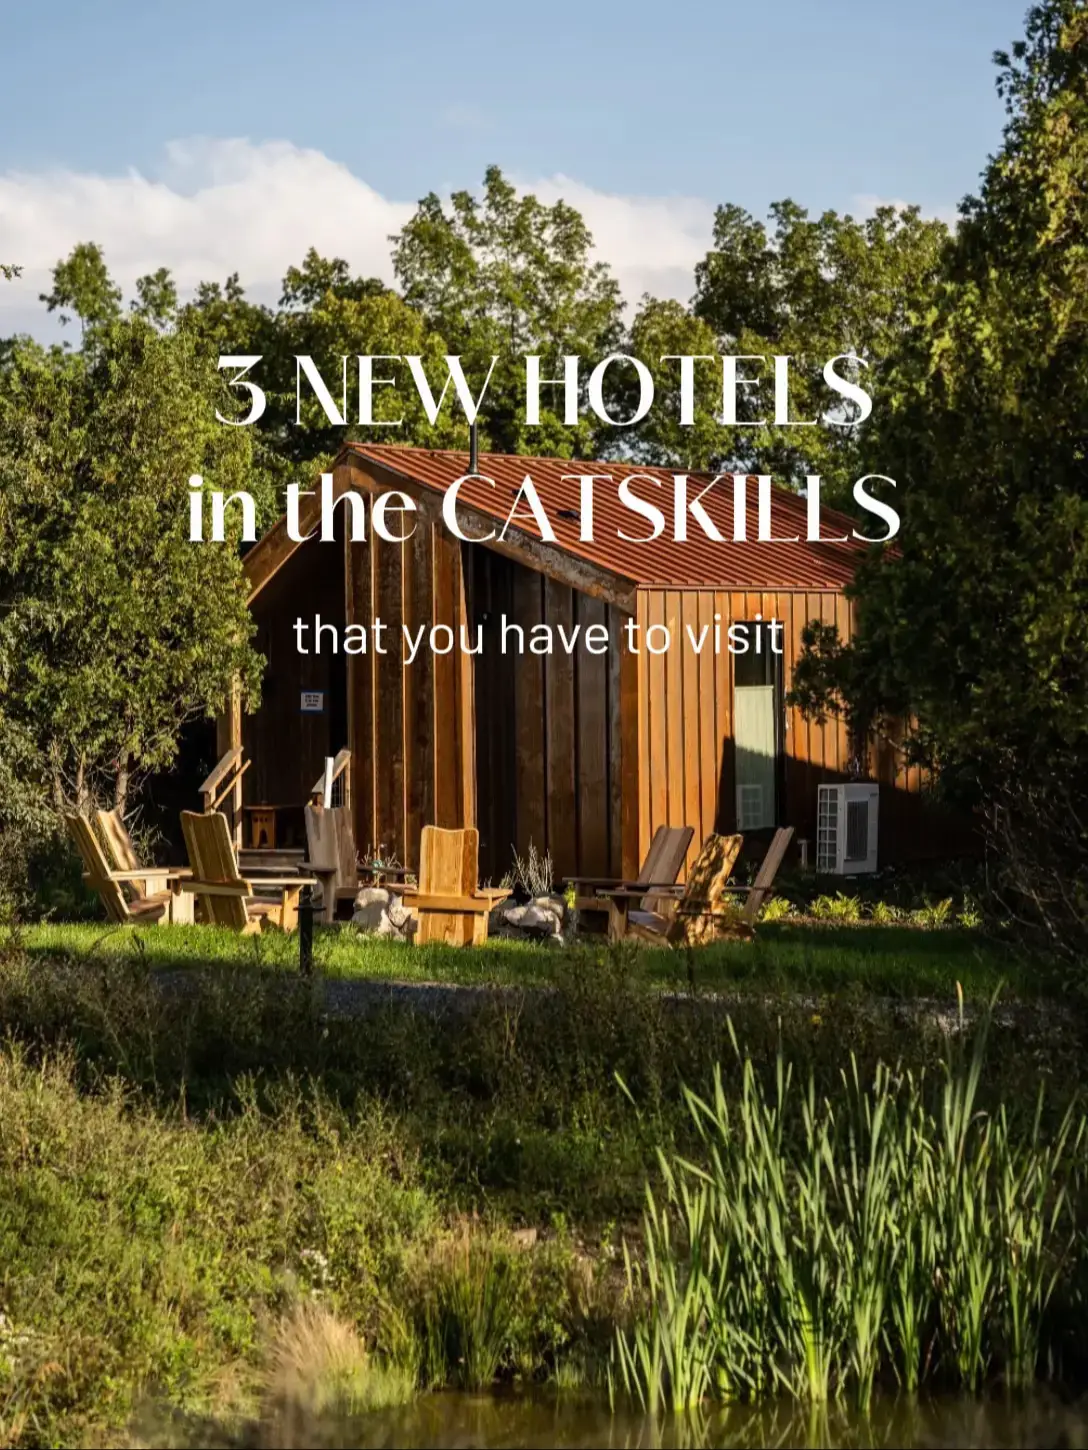 3 new hotels in the Catskills's images